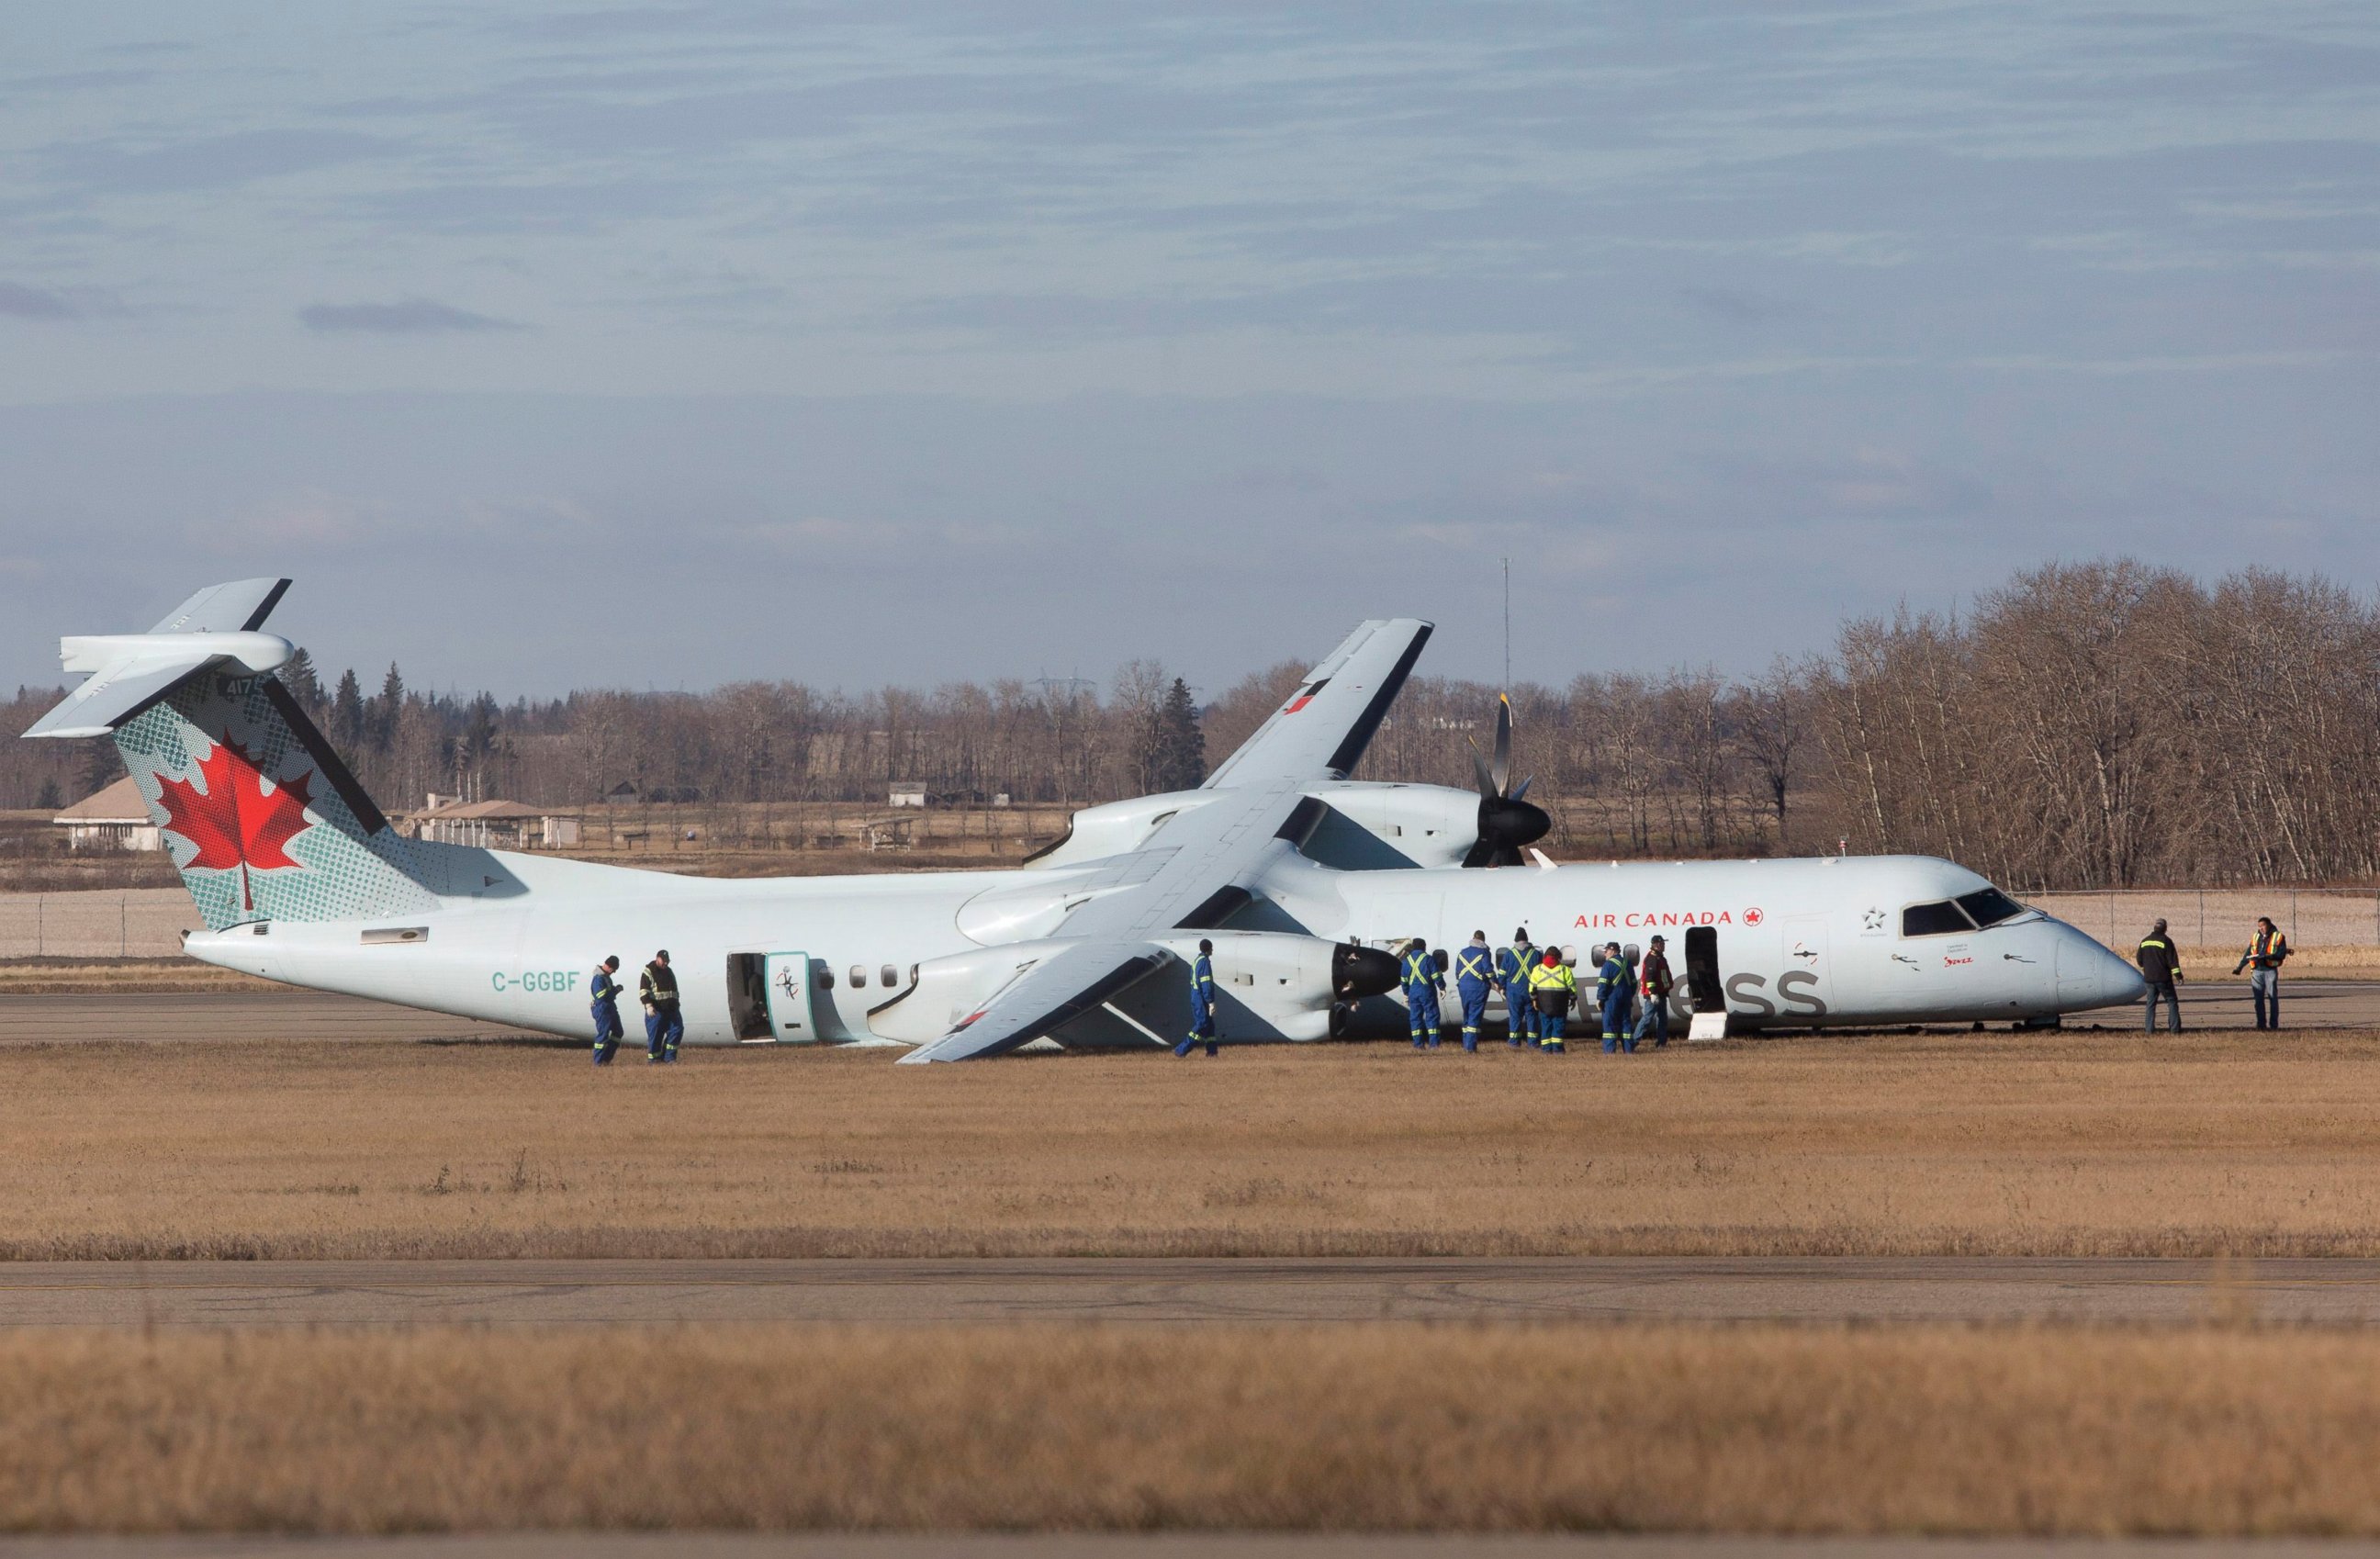 PHOTO: Investigators look over the scene of an Air Canada passenger plane after it had rough landing in Edmonton, Alberta on Friday, Nov. 7, 2014.